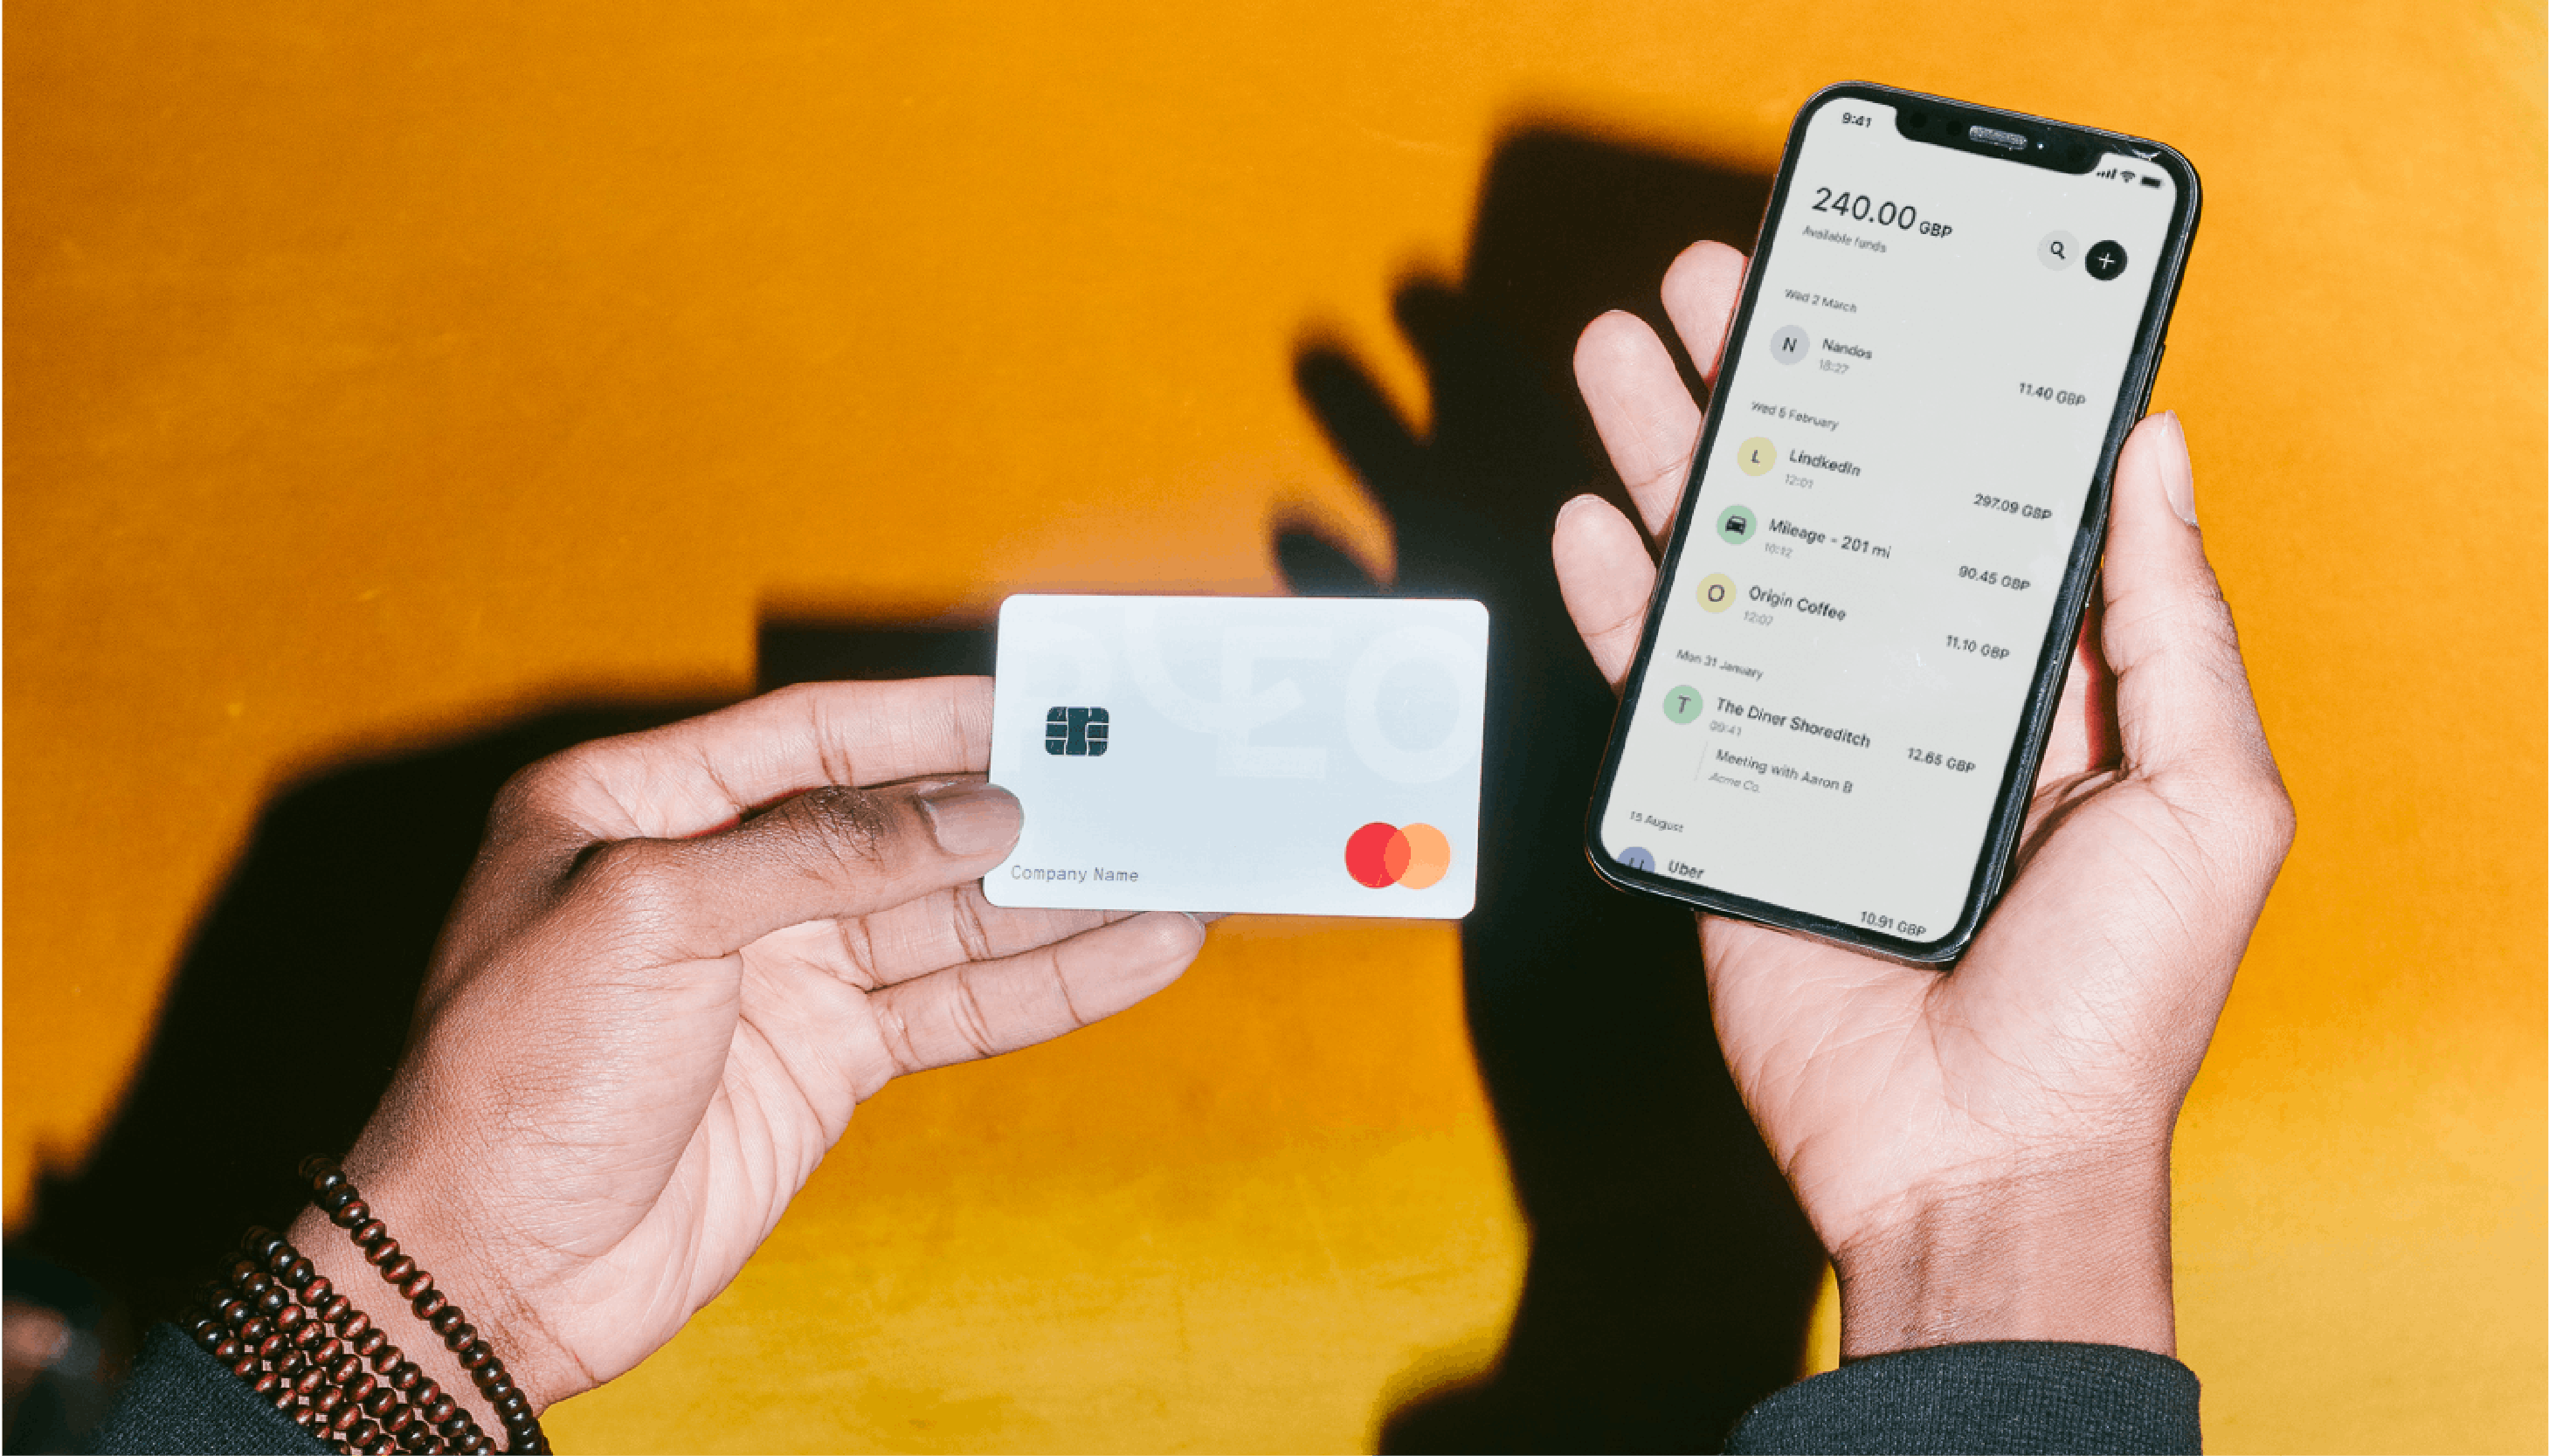 A smart card and even smarter app